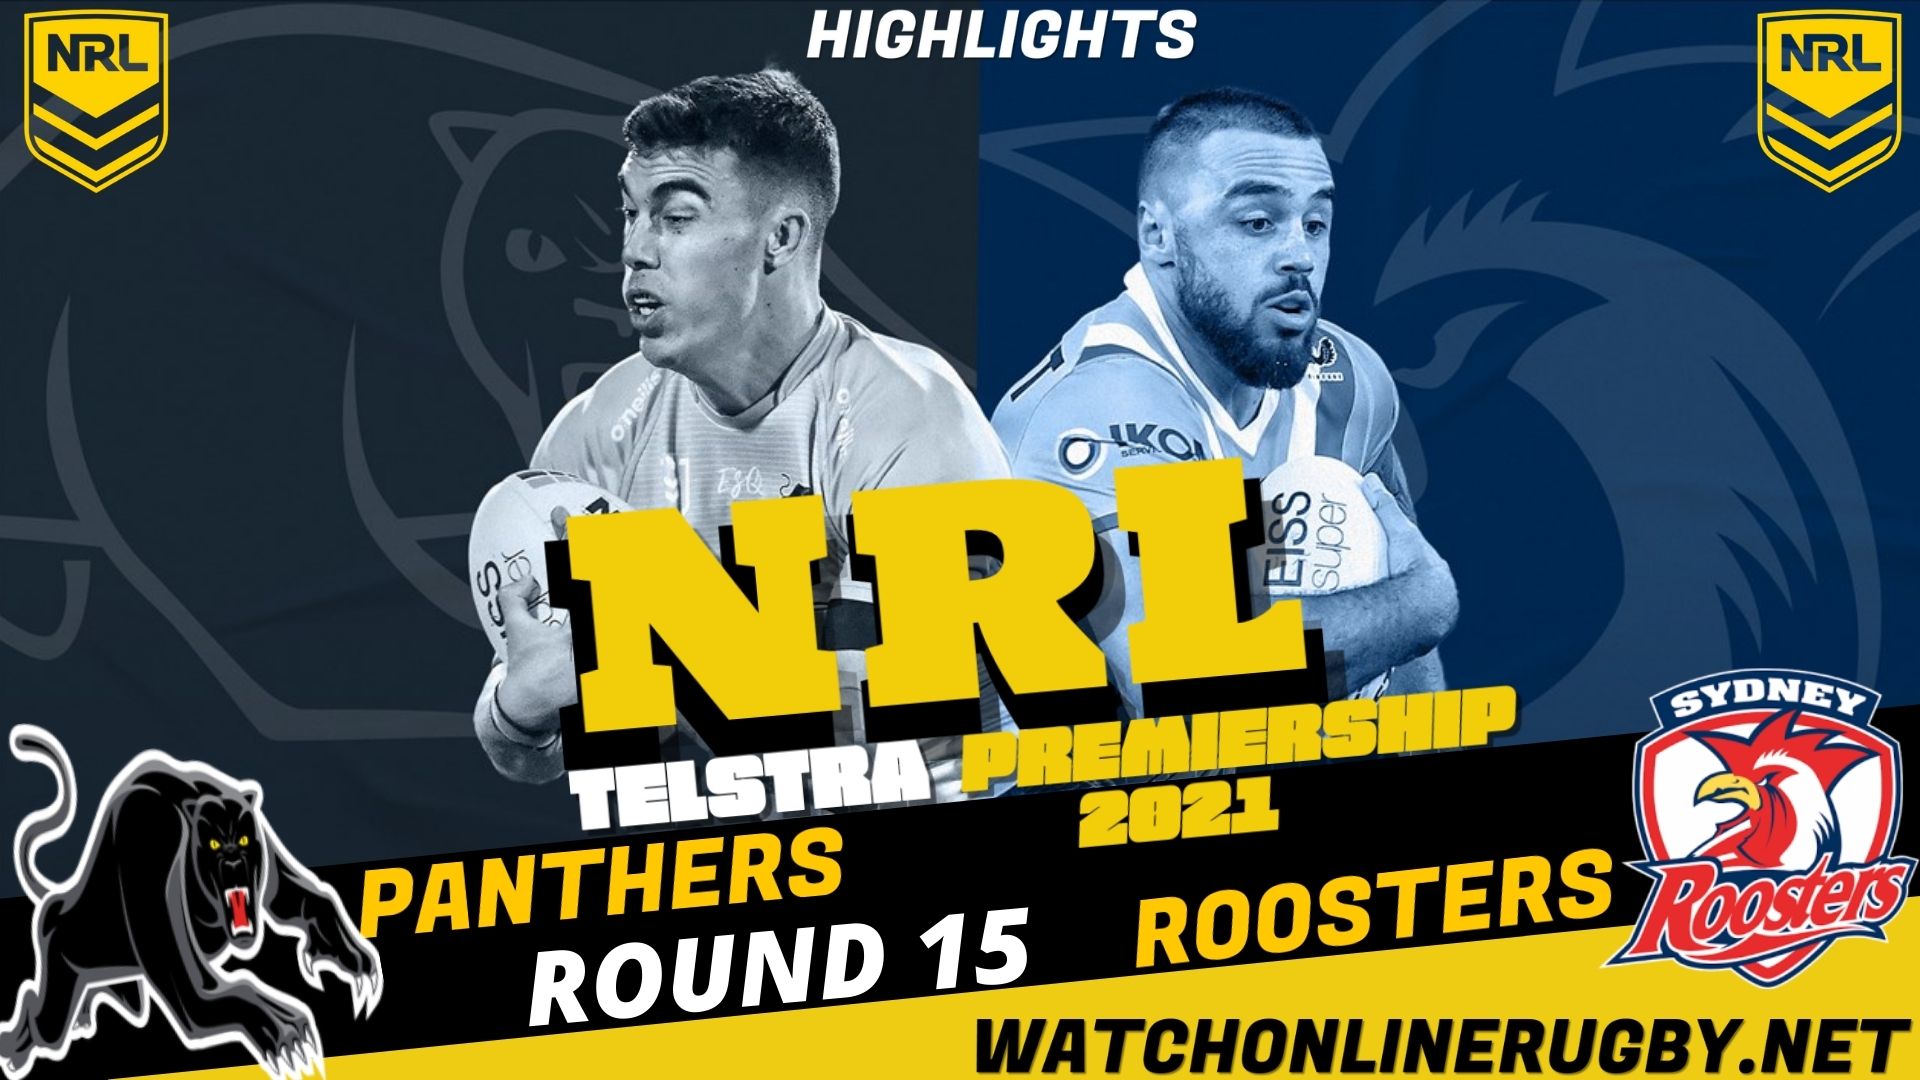 Panthers Vs Roosters Highlights RD 15 NRL Rugby